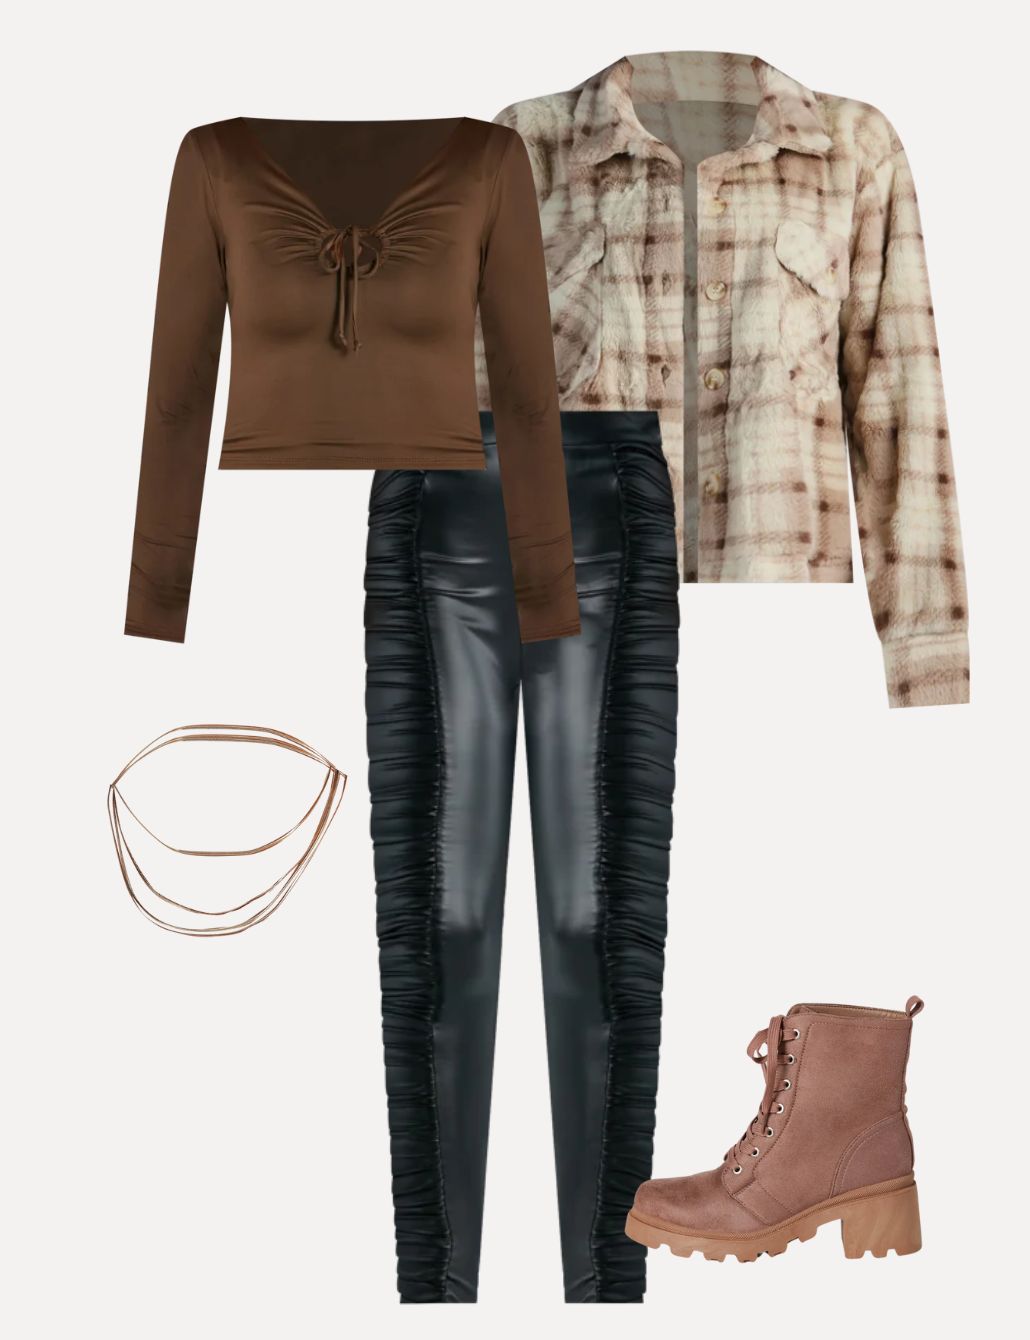 Leather Pants with Tall Boots  Leather leggings fashion, Fall wardrobe,  How to wear joggers